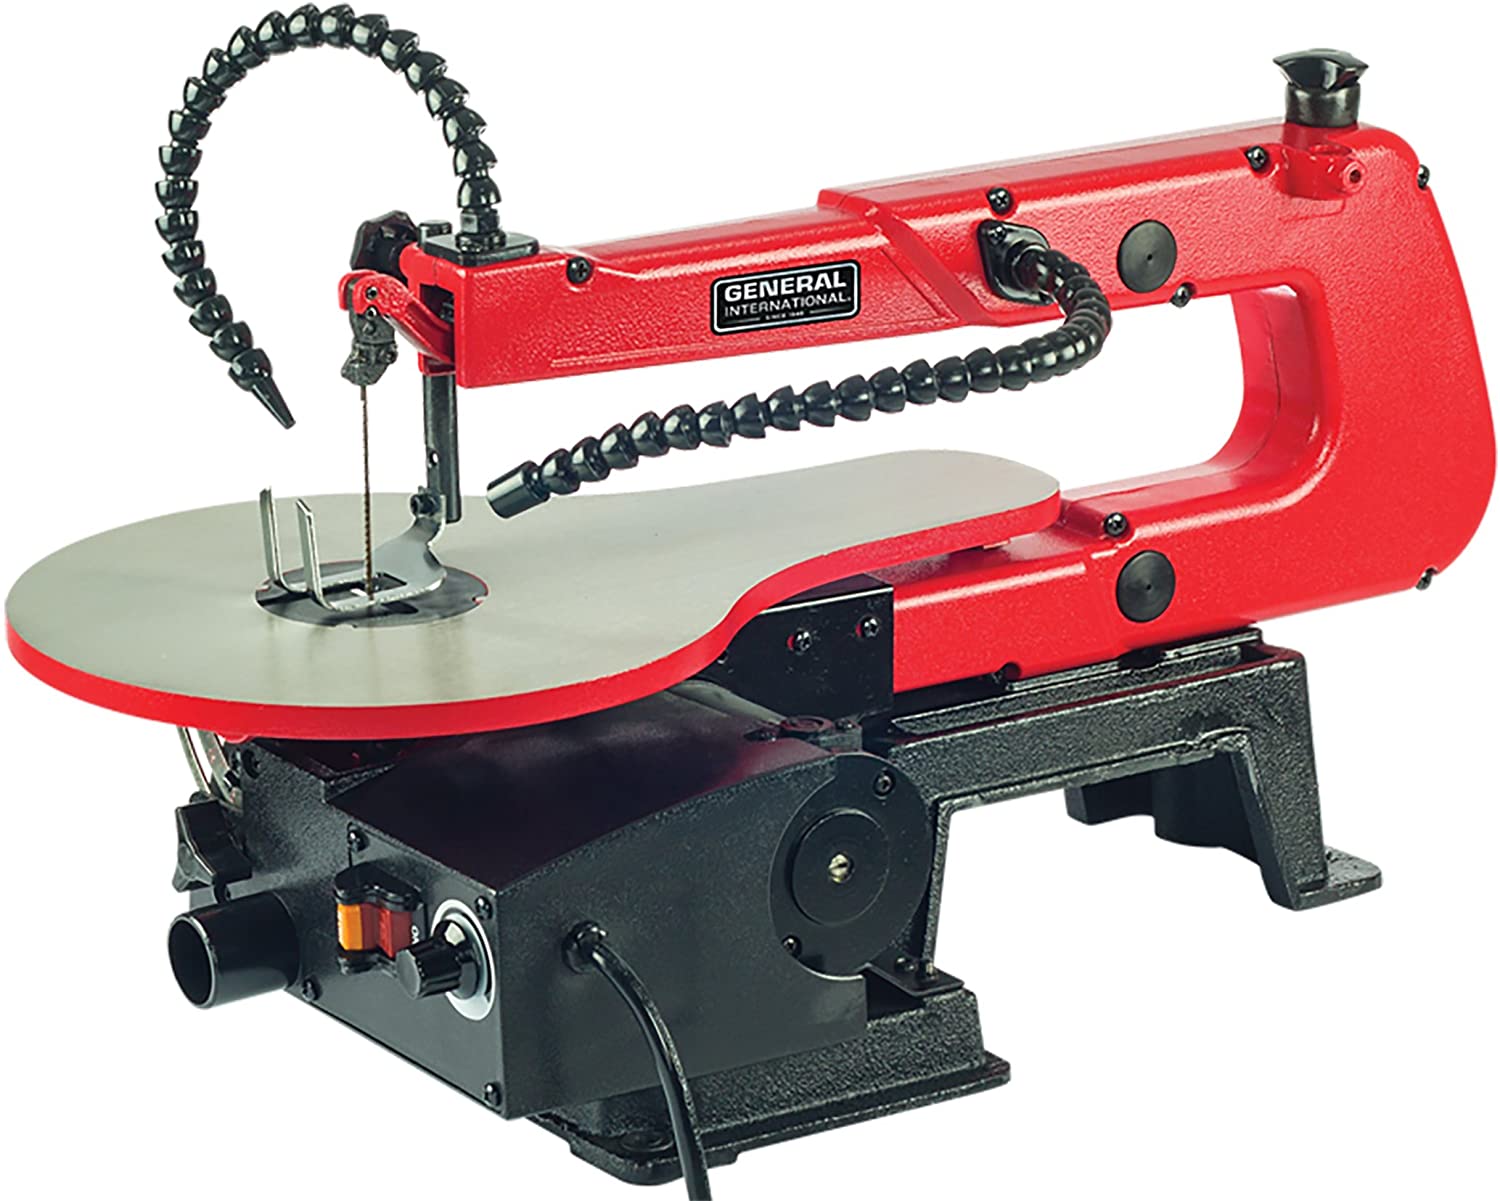 10 Best Scroll Saw Reviews 2020